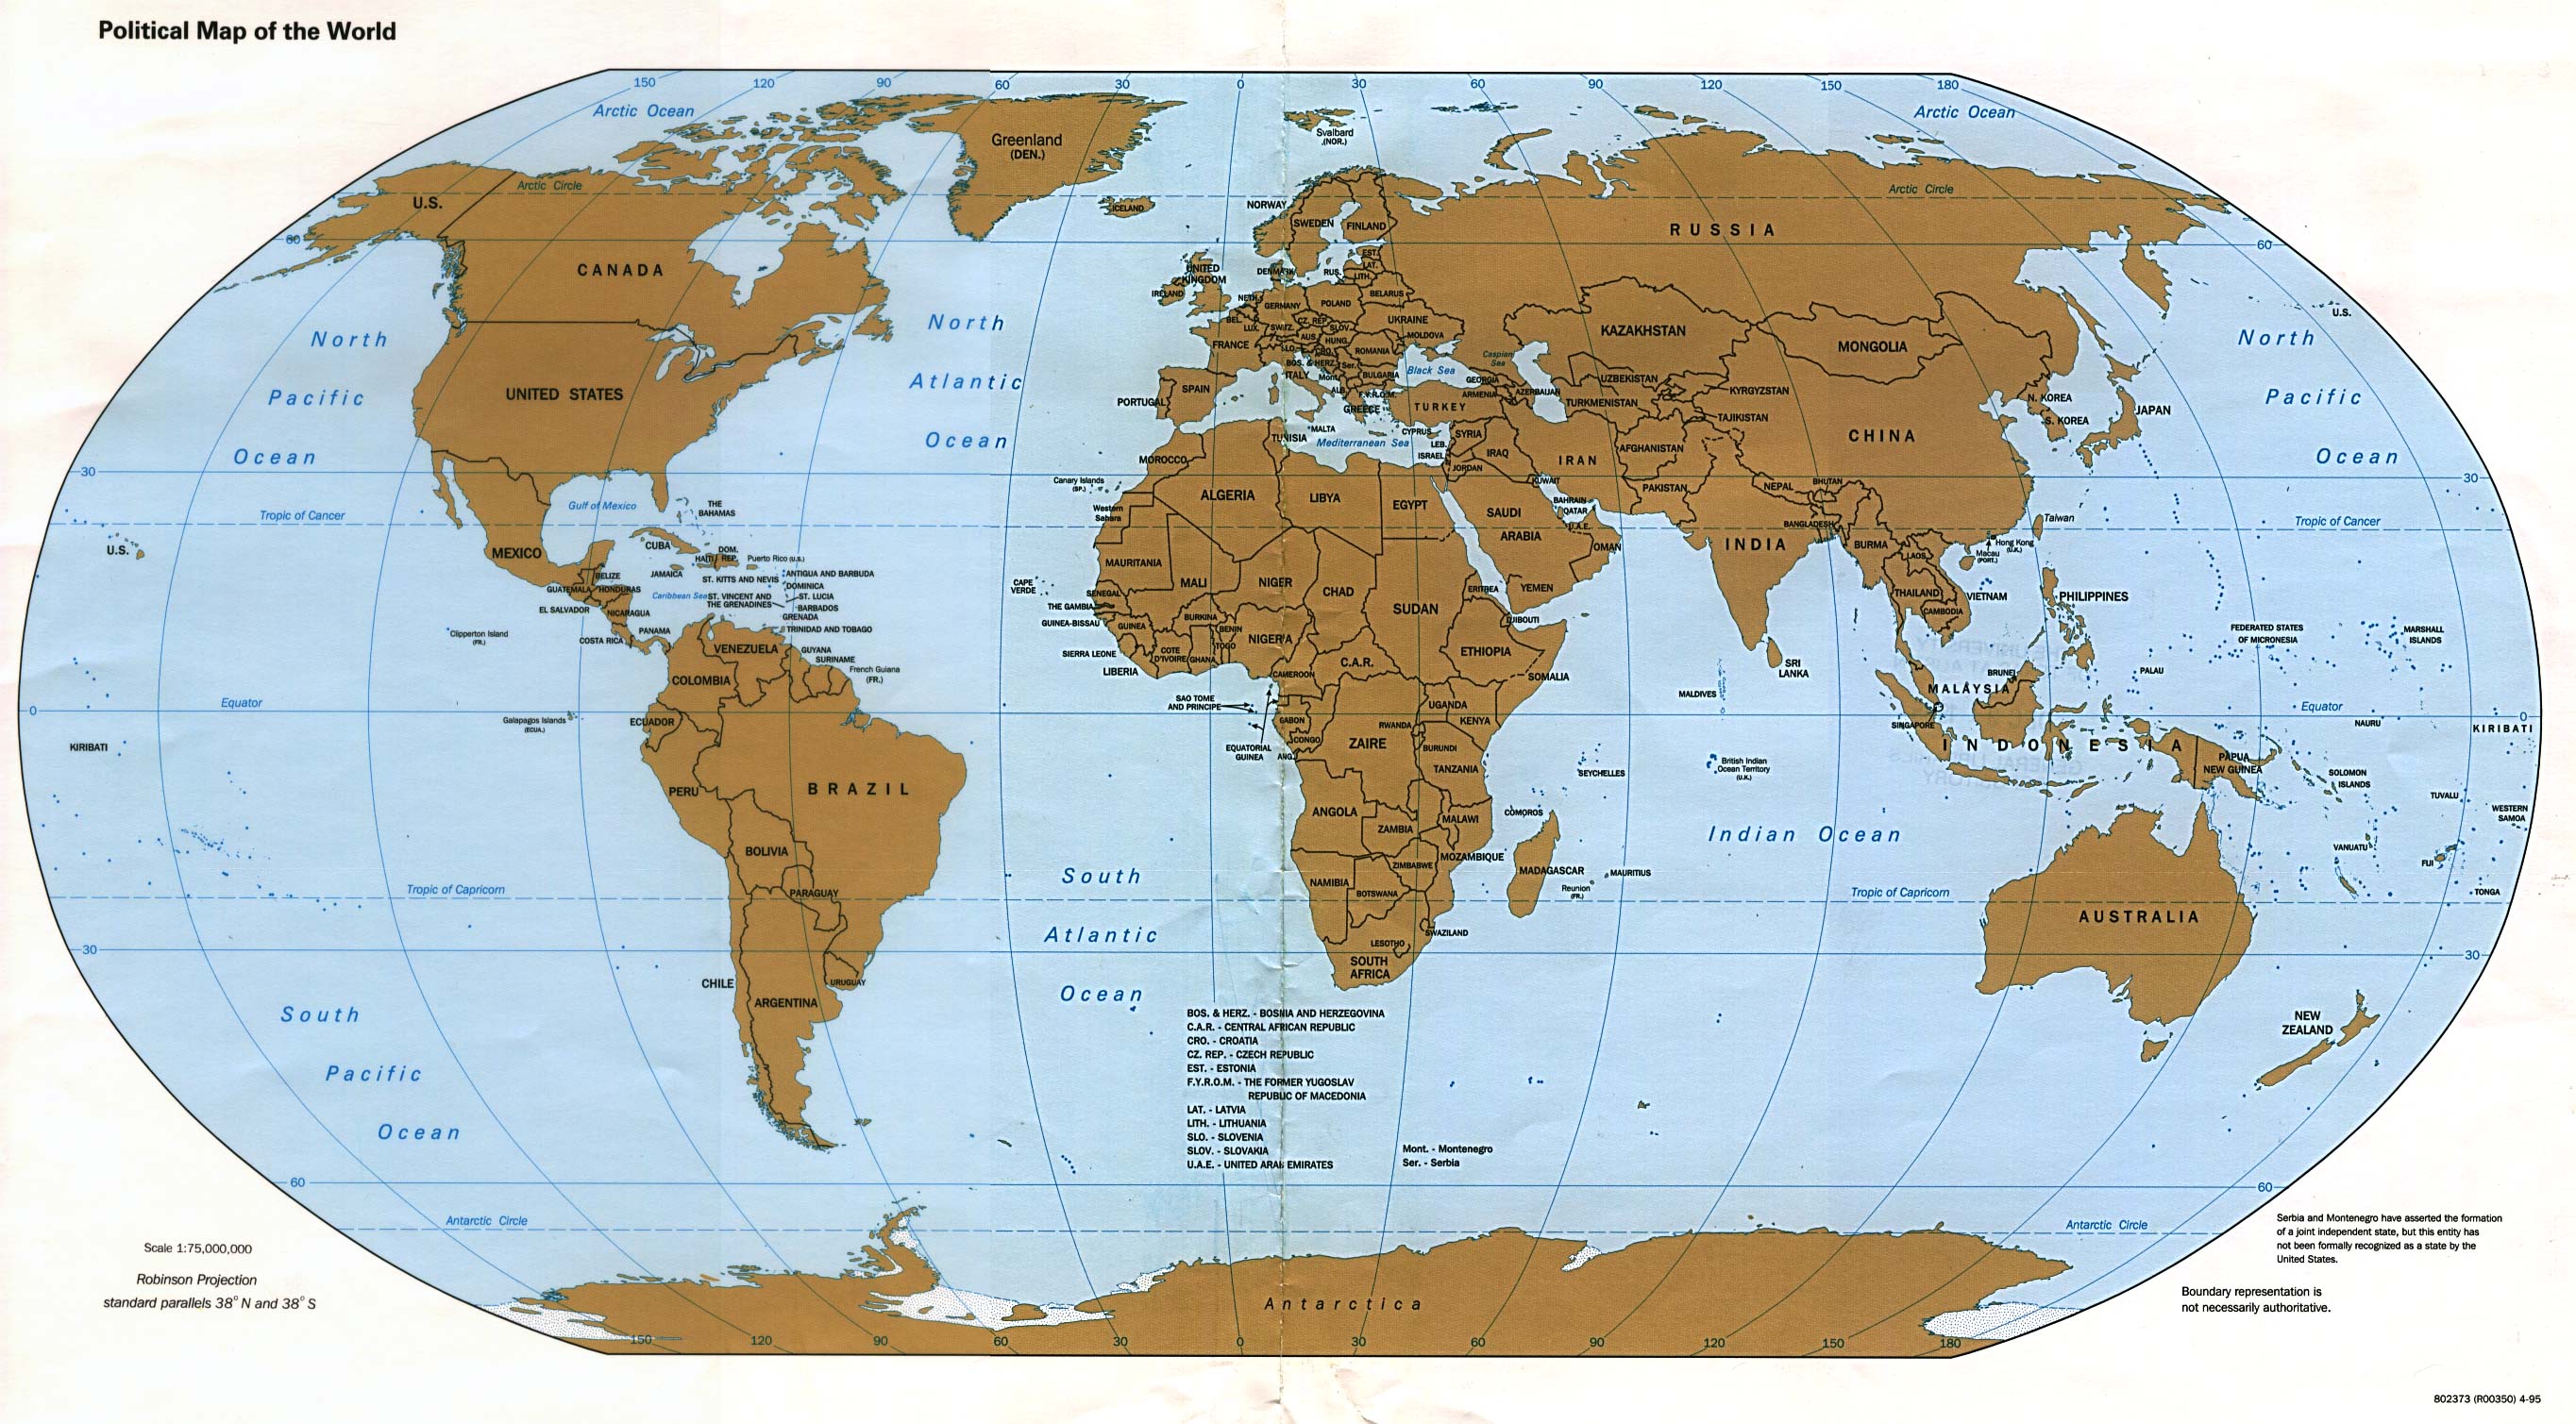 Map Of The World. World Map [Political Map] April 1995 (588K) 